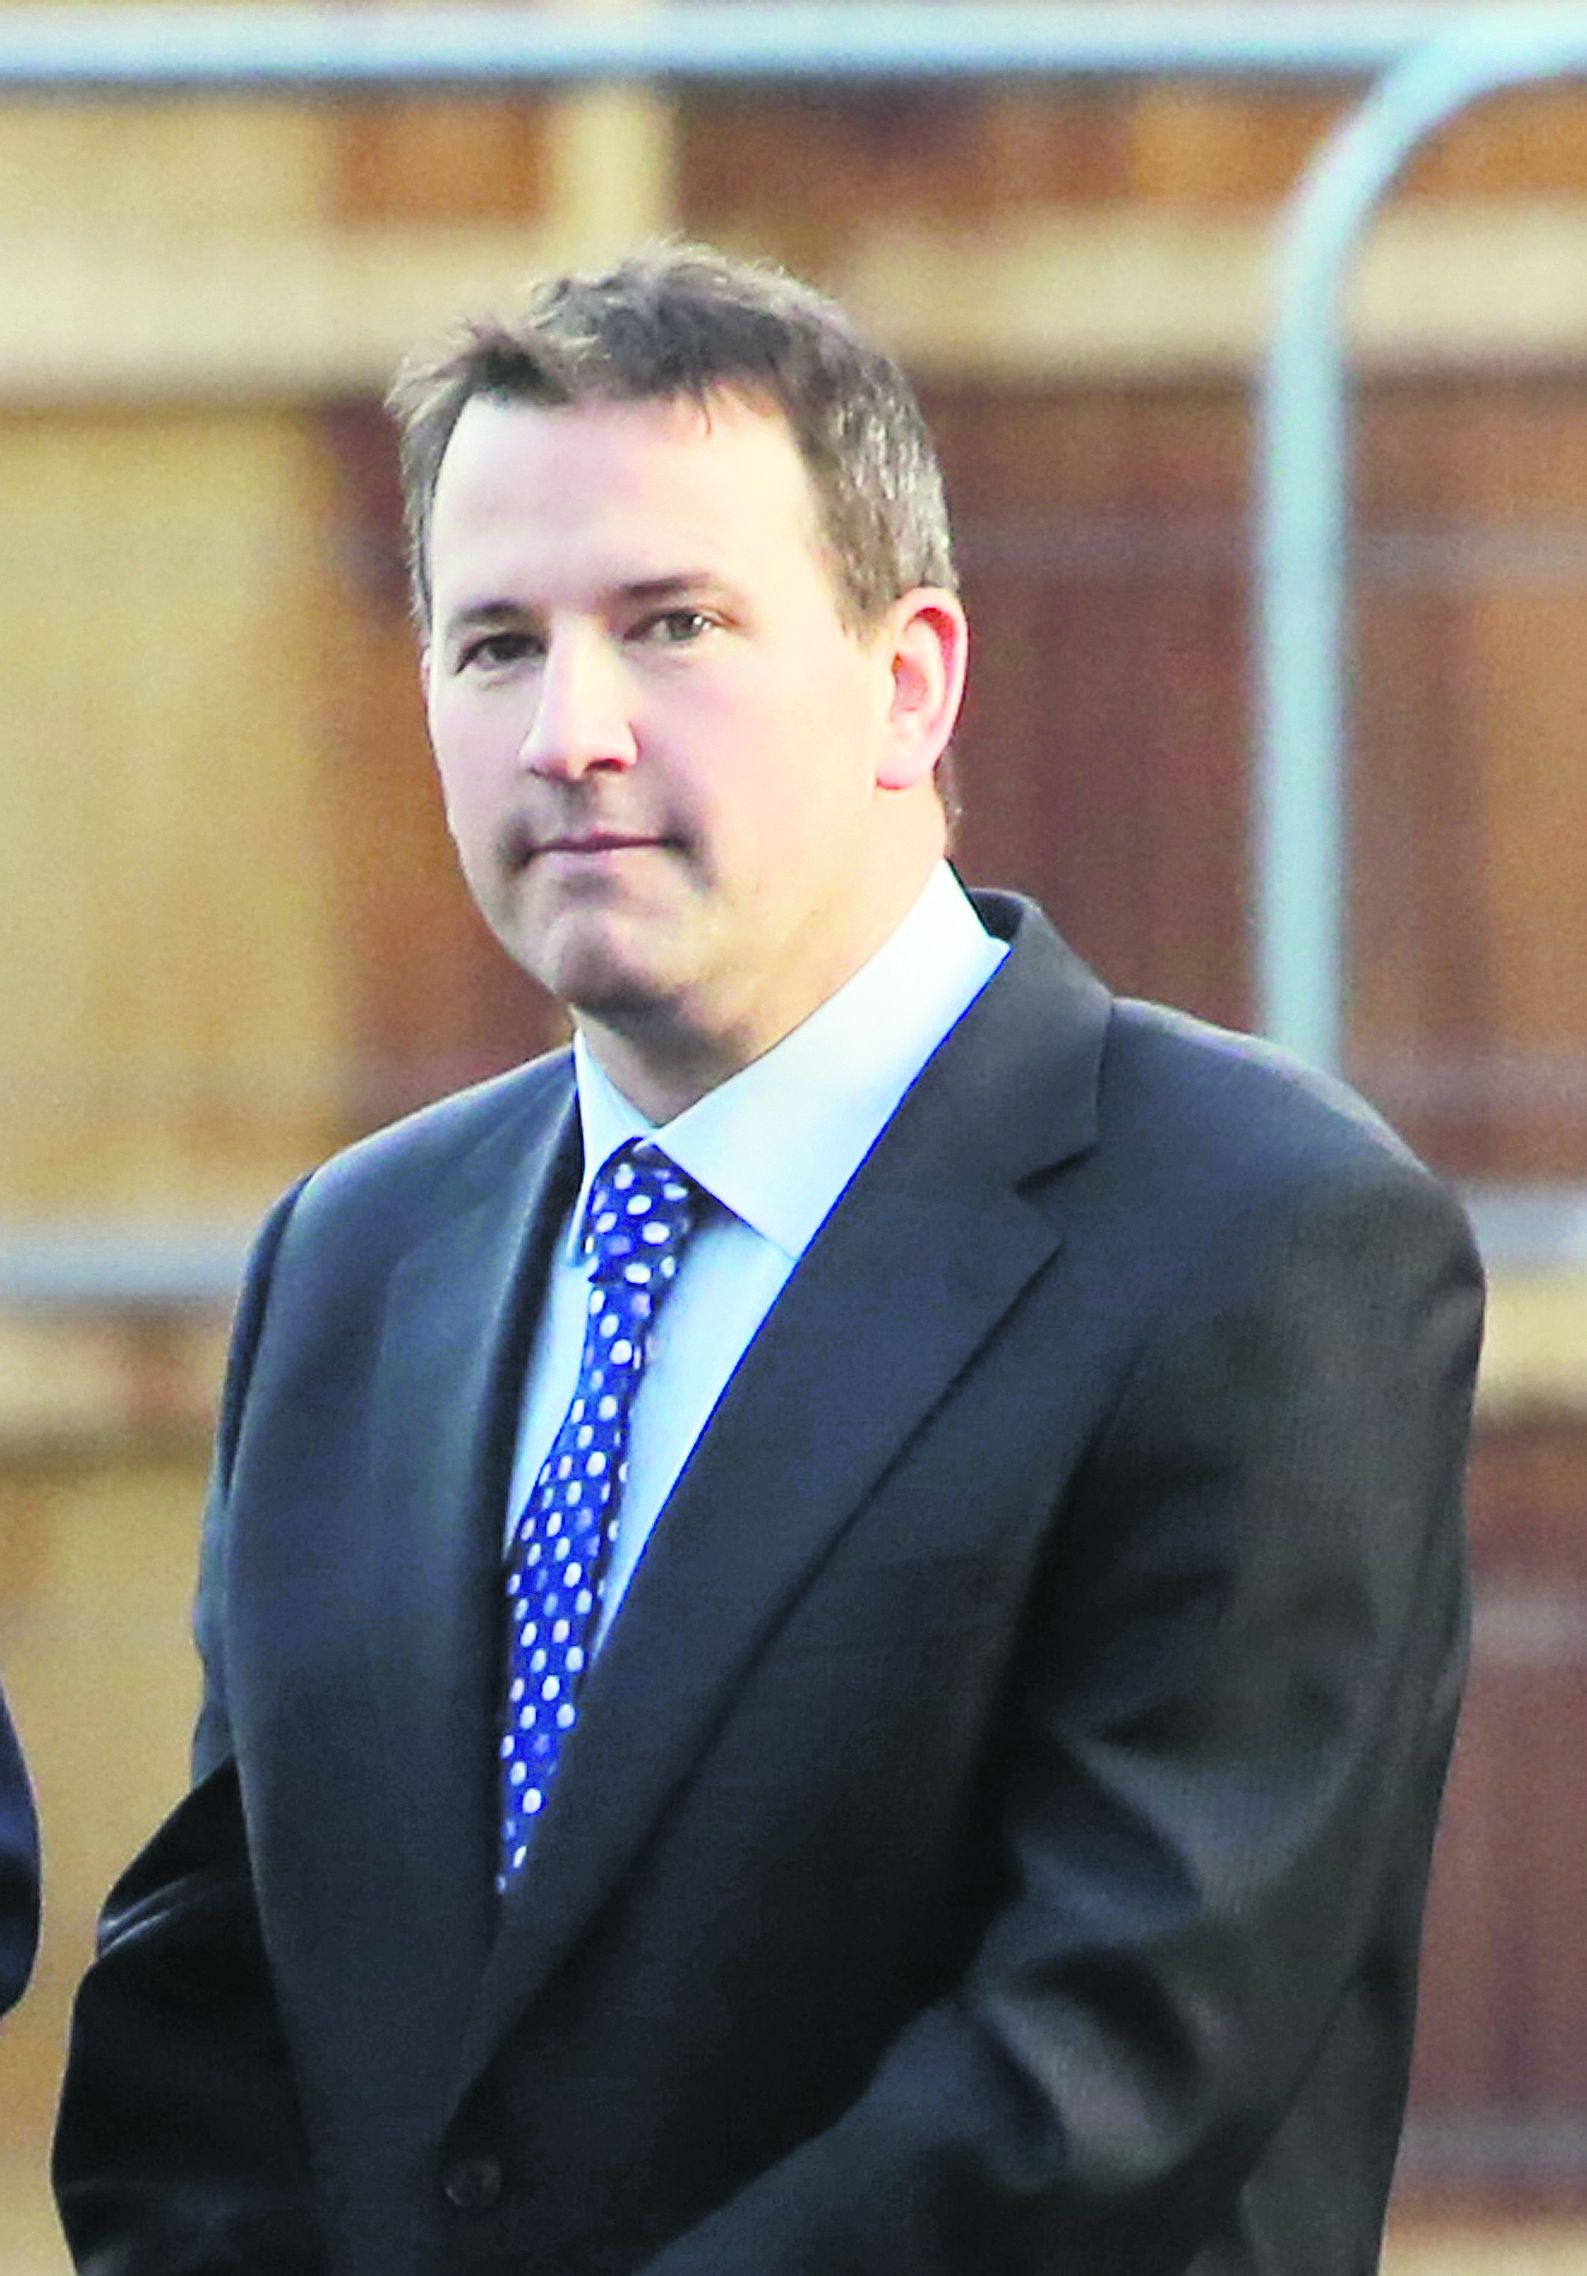 Graham Dwyer is on trial for the murder of Elaine O